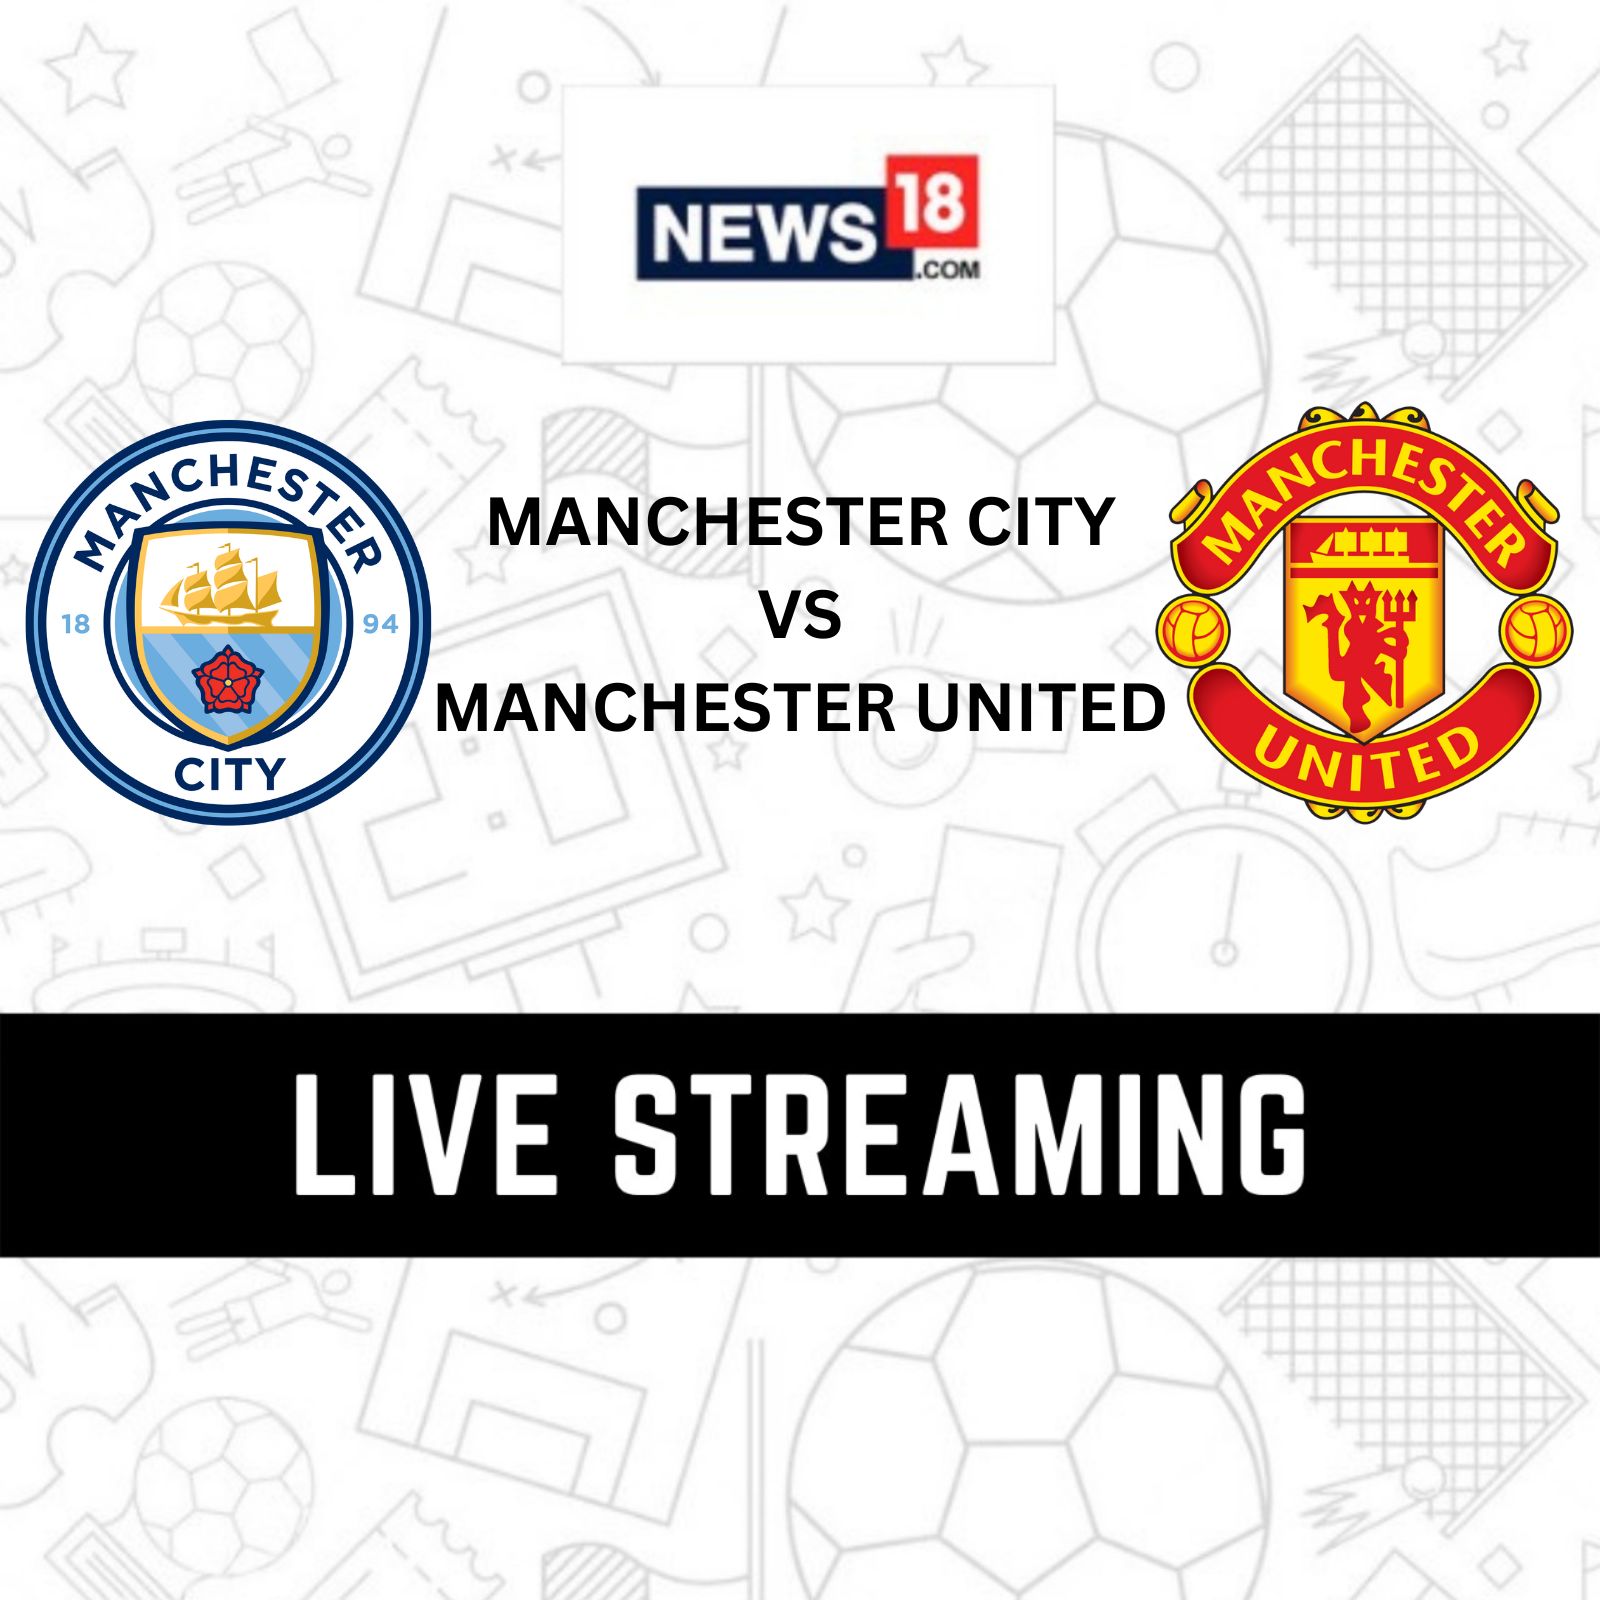 Manchester City vs Manchester United Live Streaming When and Where to Watch Manchester City vs Manchester United Premier League 2022-23 Live Coverage on Live TV Online